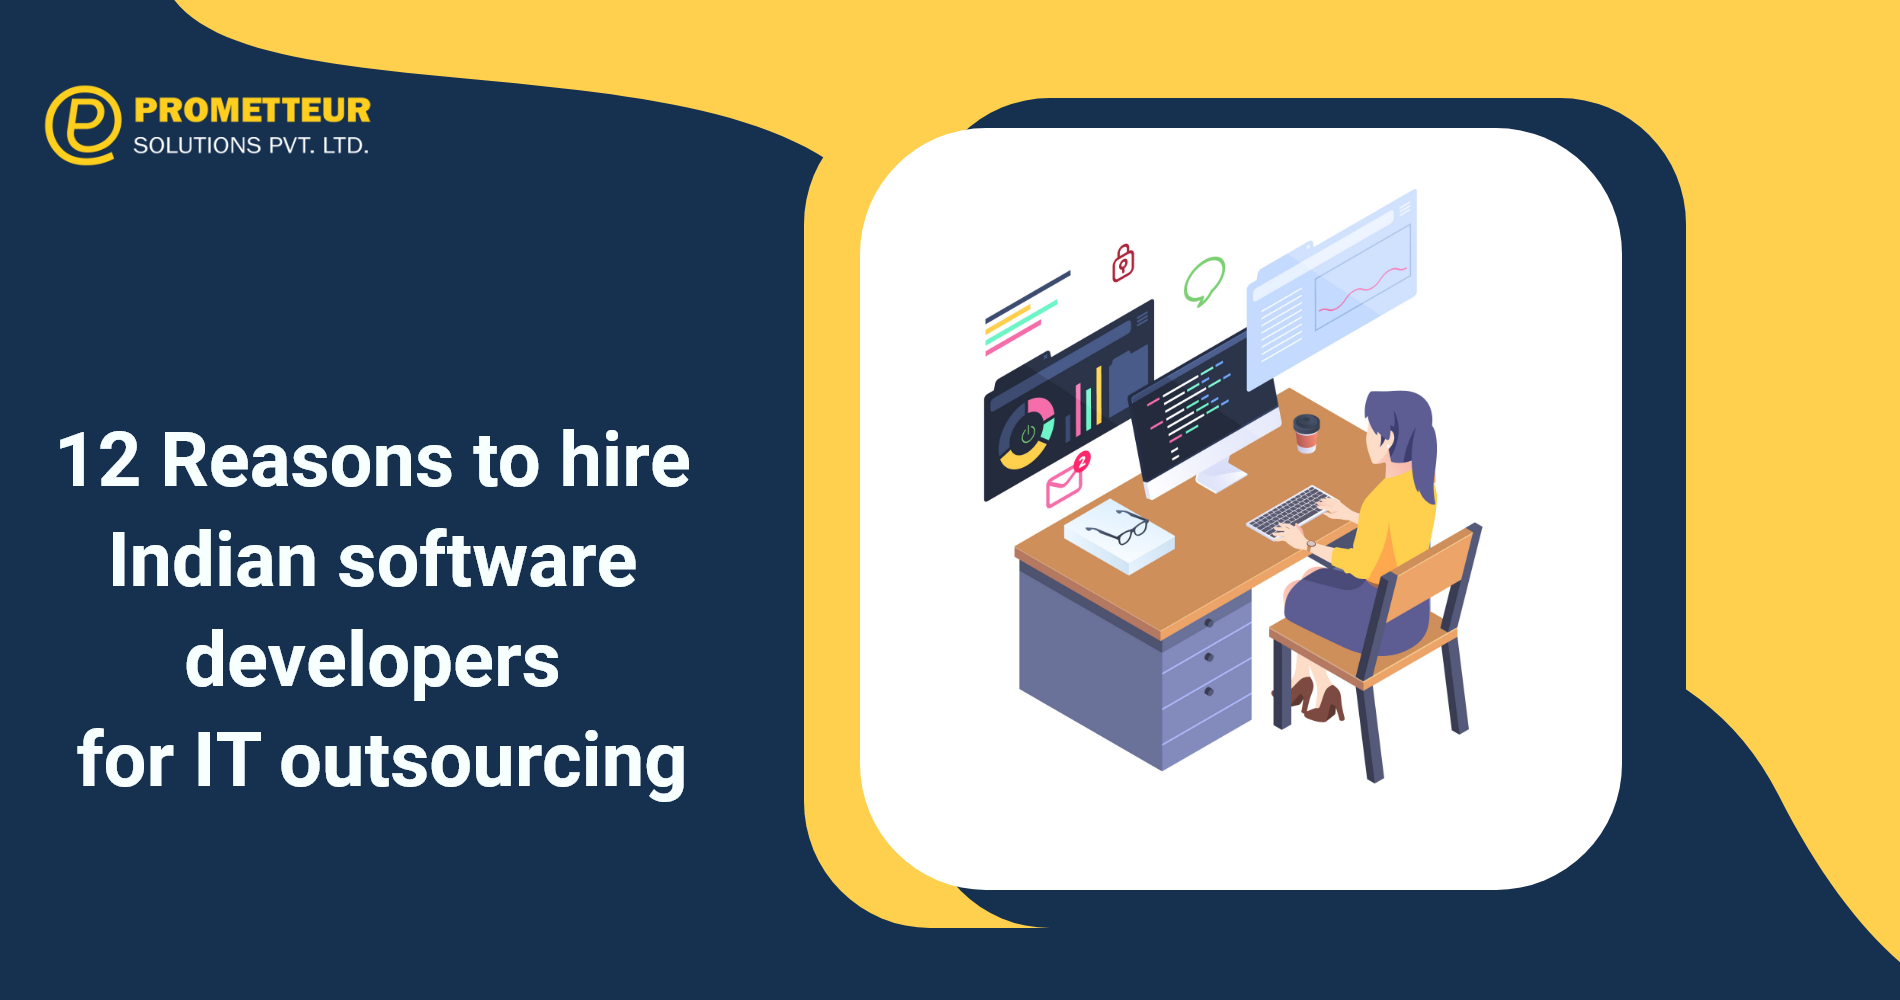 12 Reasons to hire Indian software developers for IT outsourcing